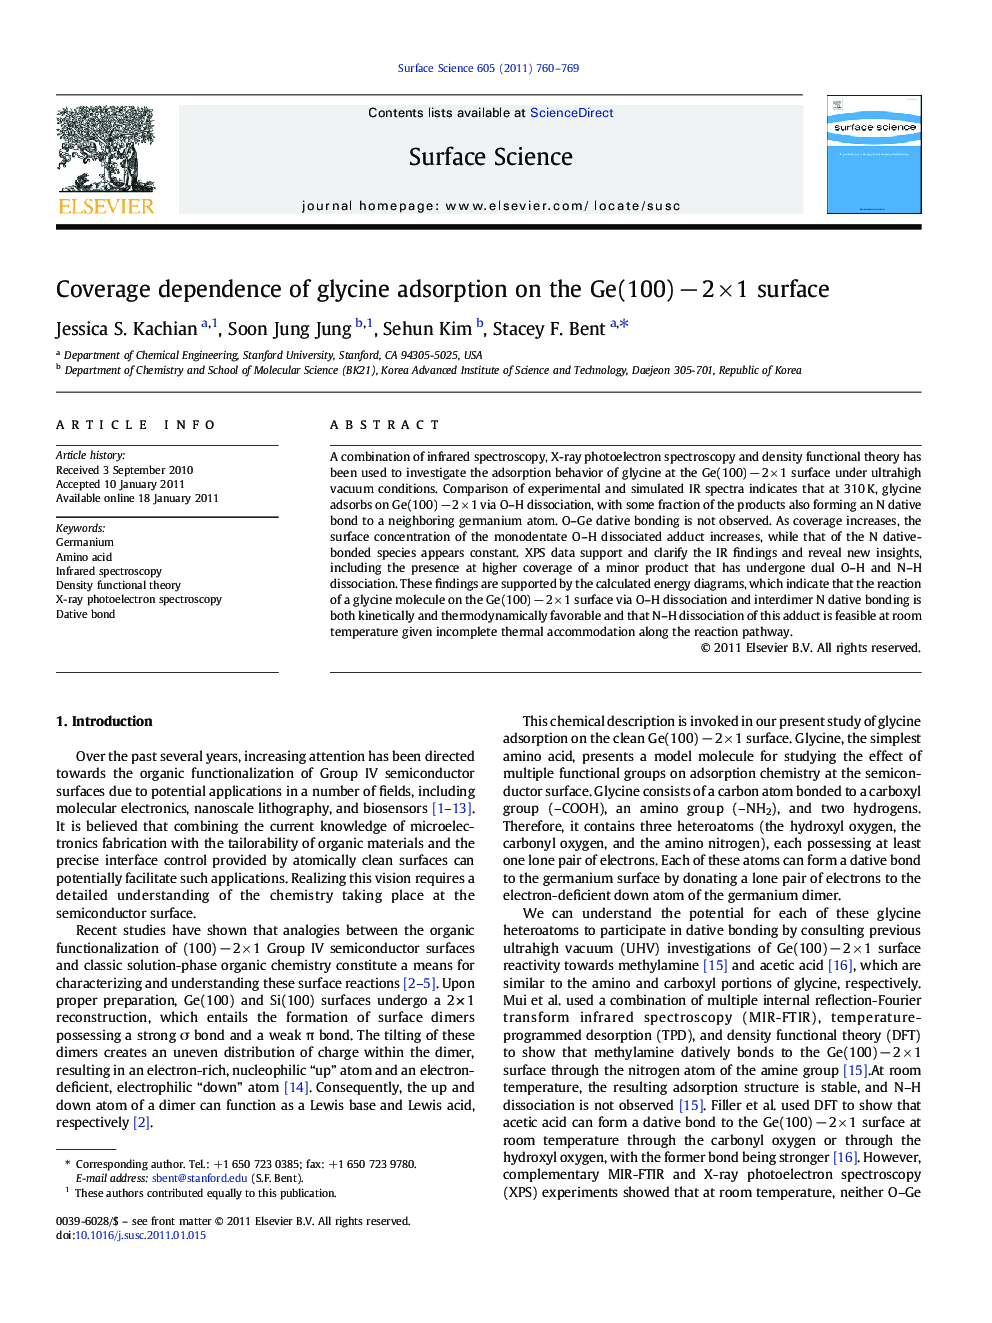 Coverage dependence of glycine adsorption on the Ge(100)Â âÂ 2Â ÃÂ 1 surface